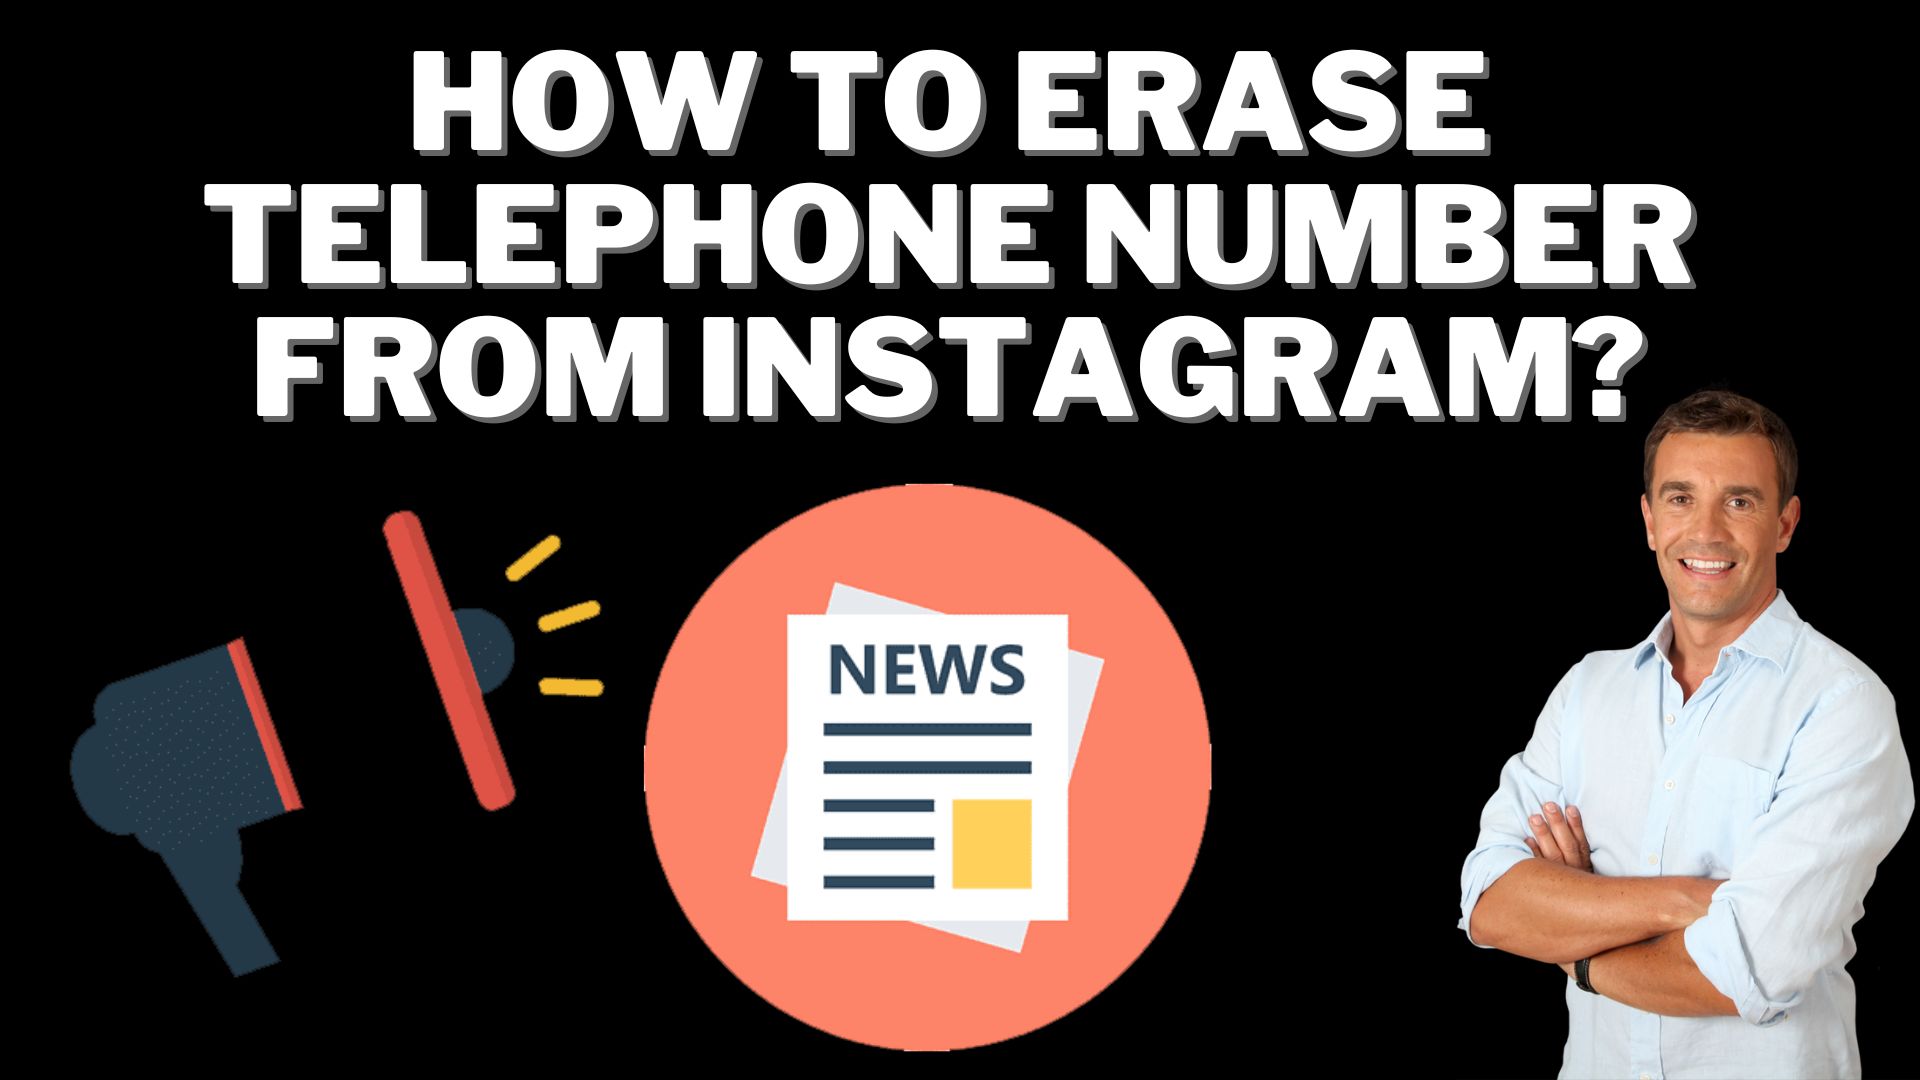 How To Erase Telephone Number From Instagram?